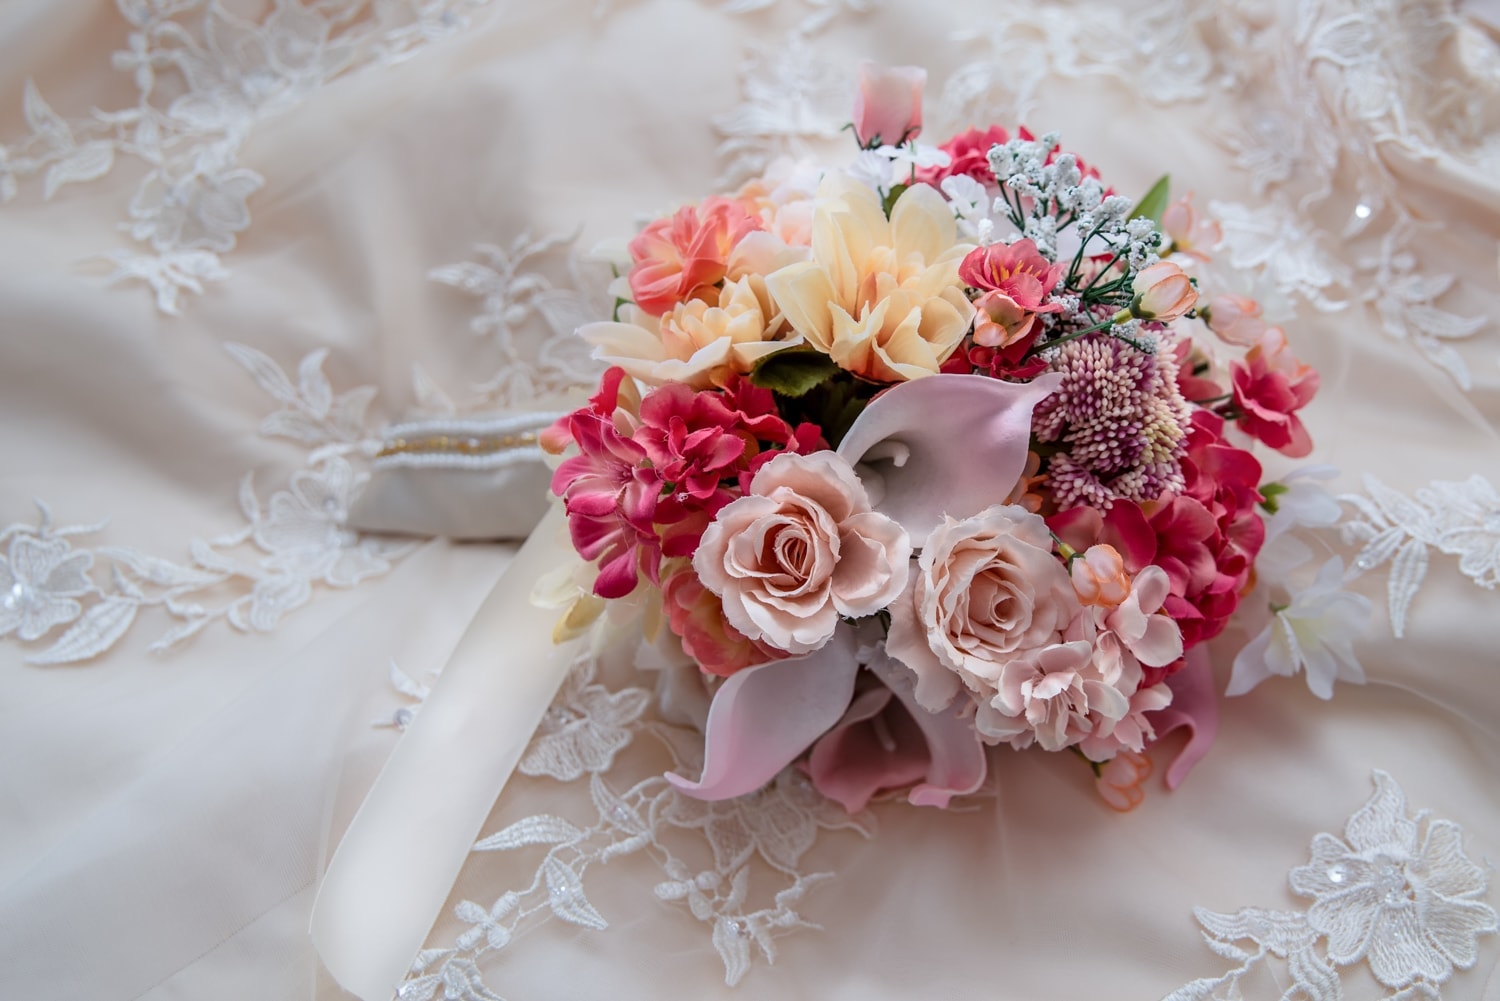 A beautiful pink, ivory and peach silk fake floral wedding bridal bouquet.